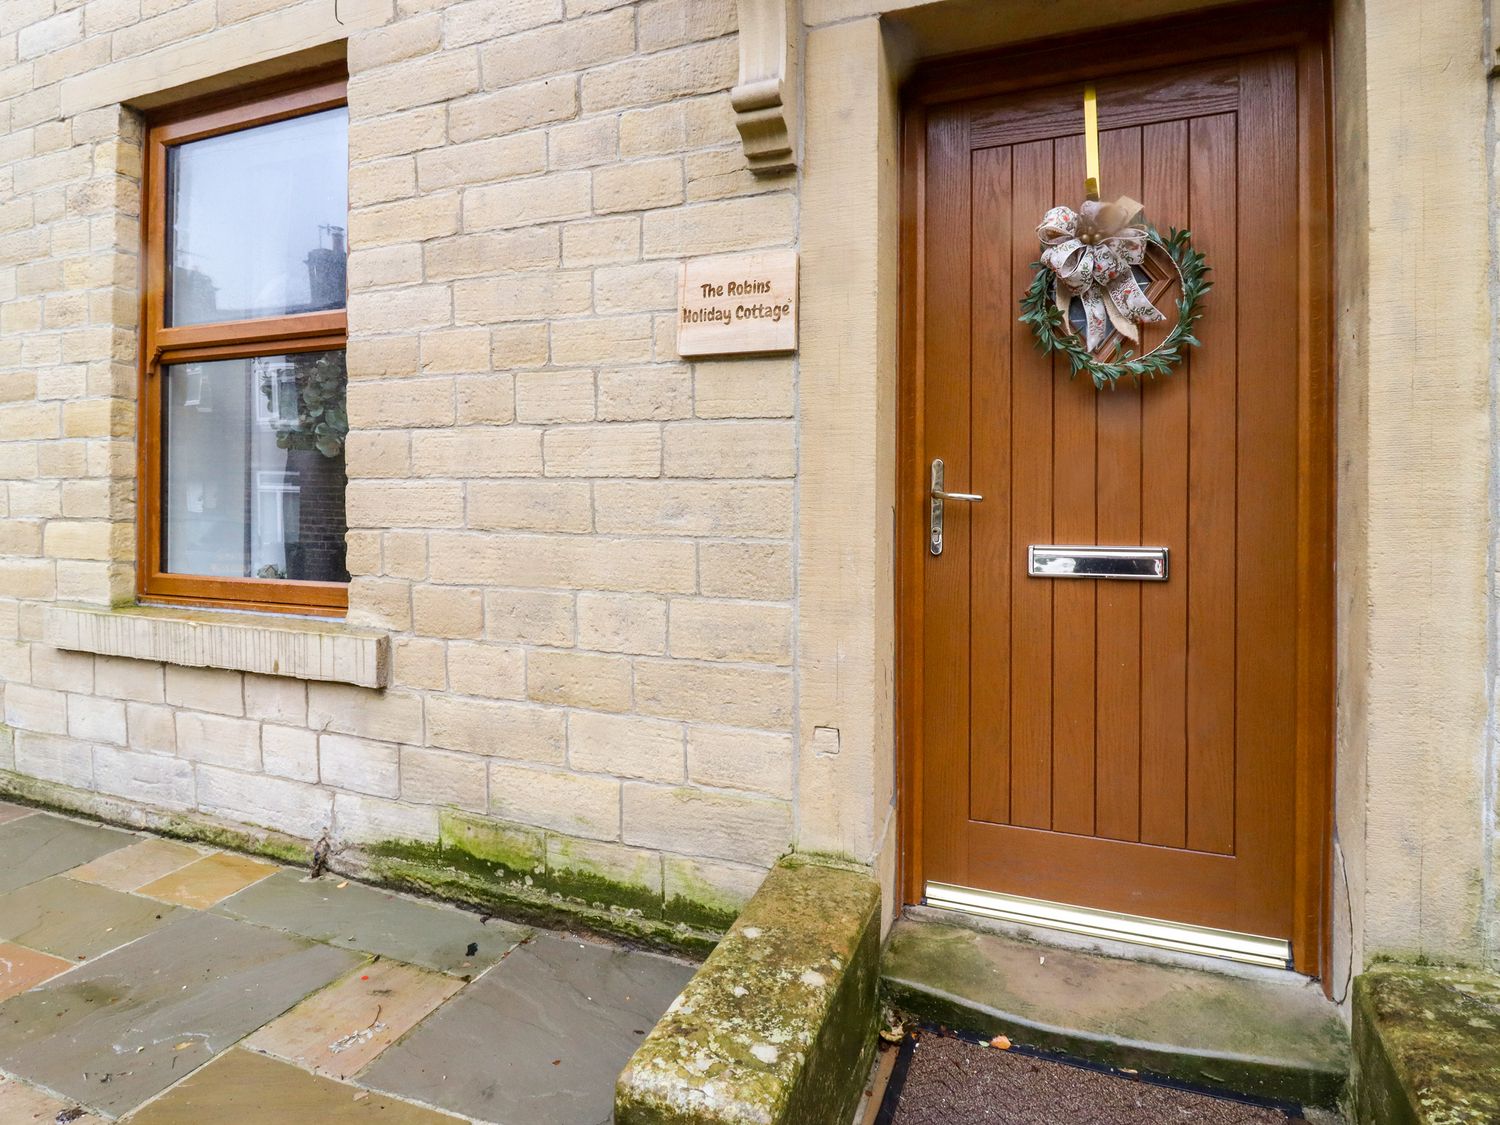 The Robins Holiday Cottage - Yorkshire Dales - 1145720 - photo 1